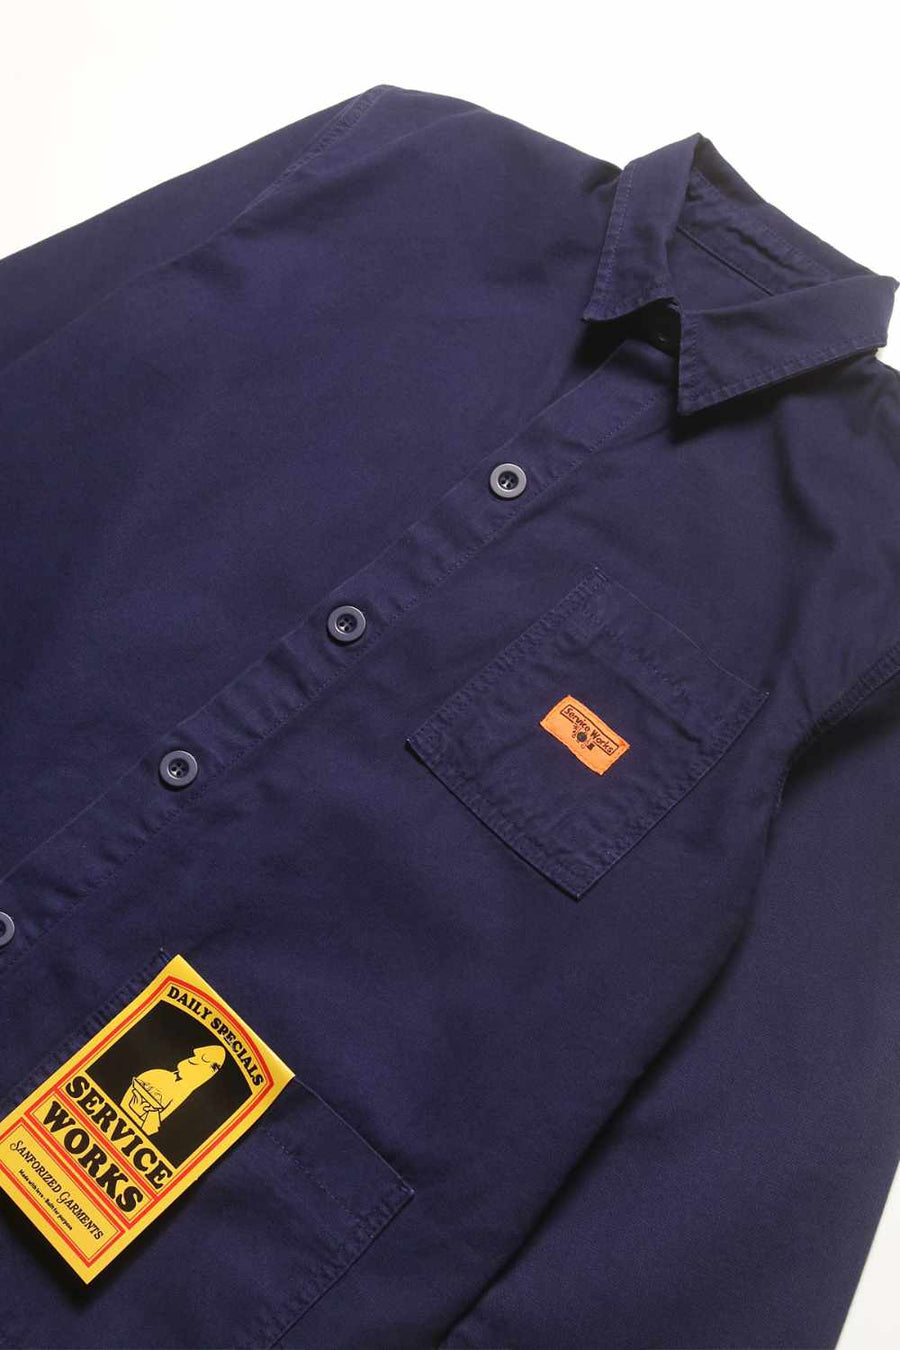 service works coverall jacket navy (LAST SIZE XLARGE)